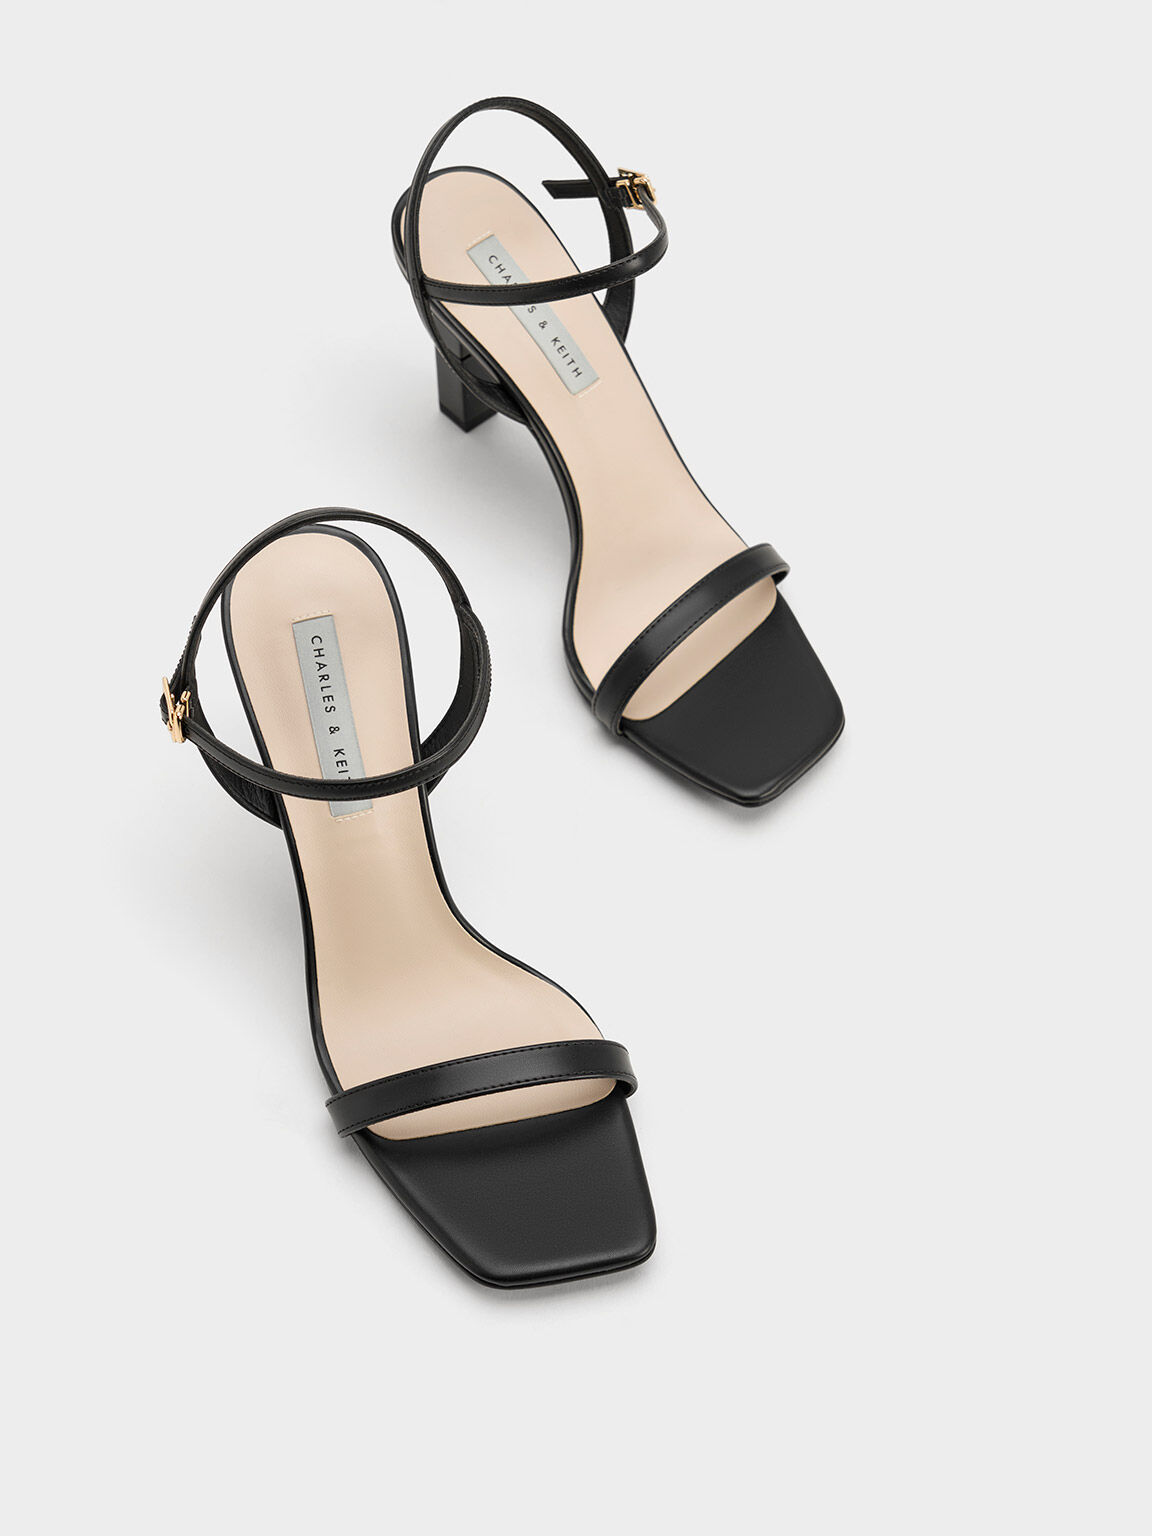 Charles & Keith Sandals  Charles and keith shoes, Black sandals, Heels